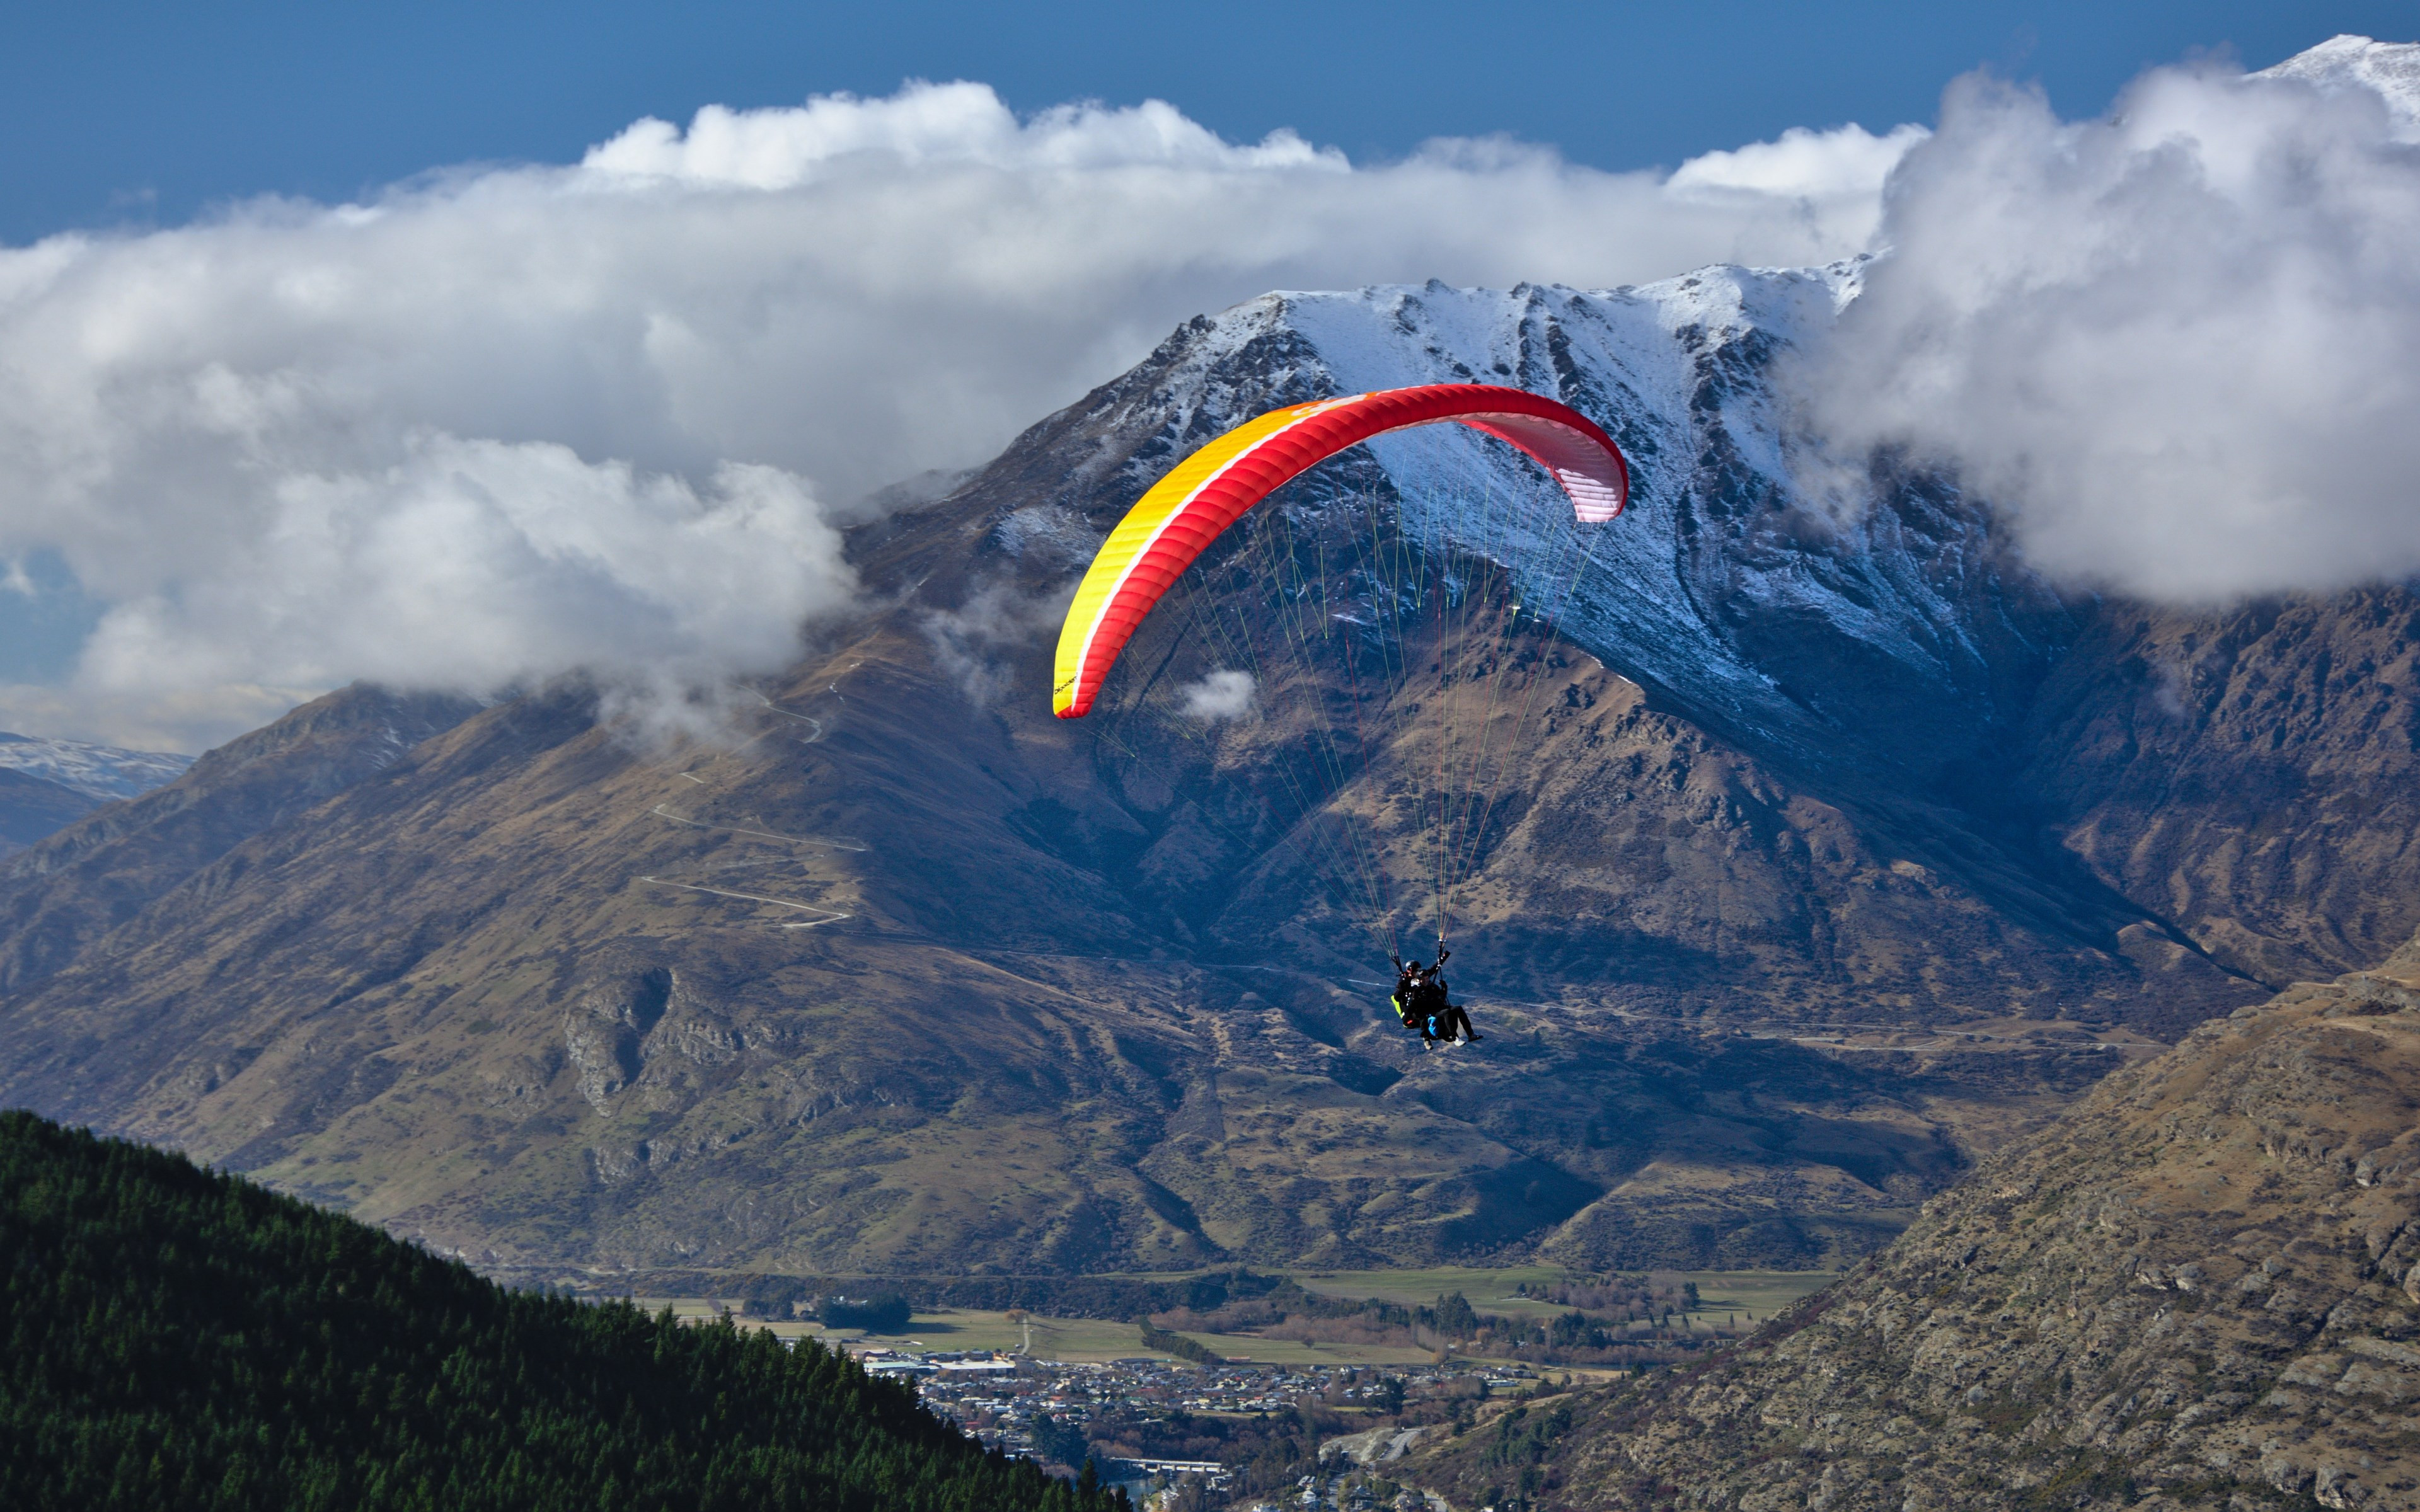 Paraglider up in the sky wallpaper 3840x2400